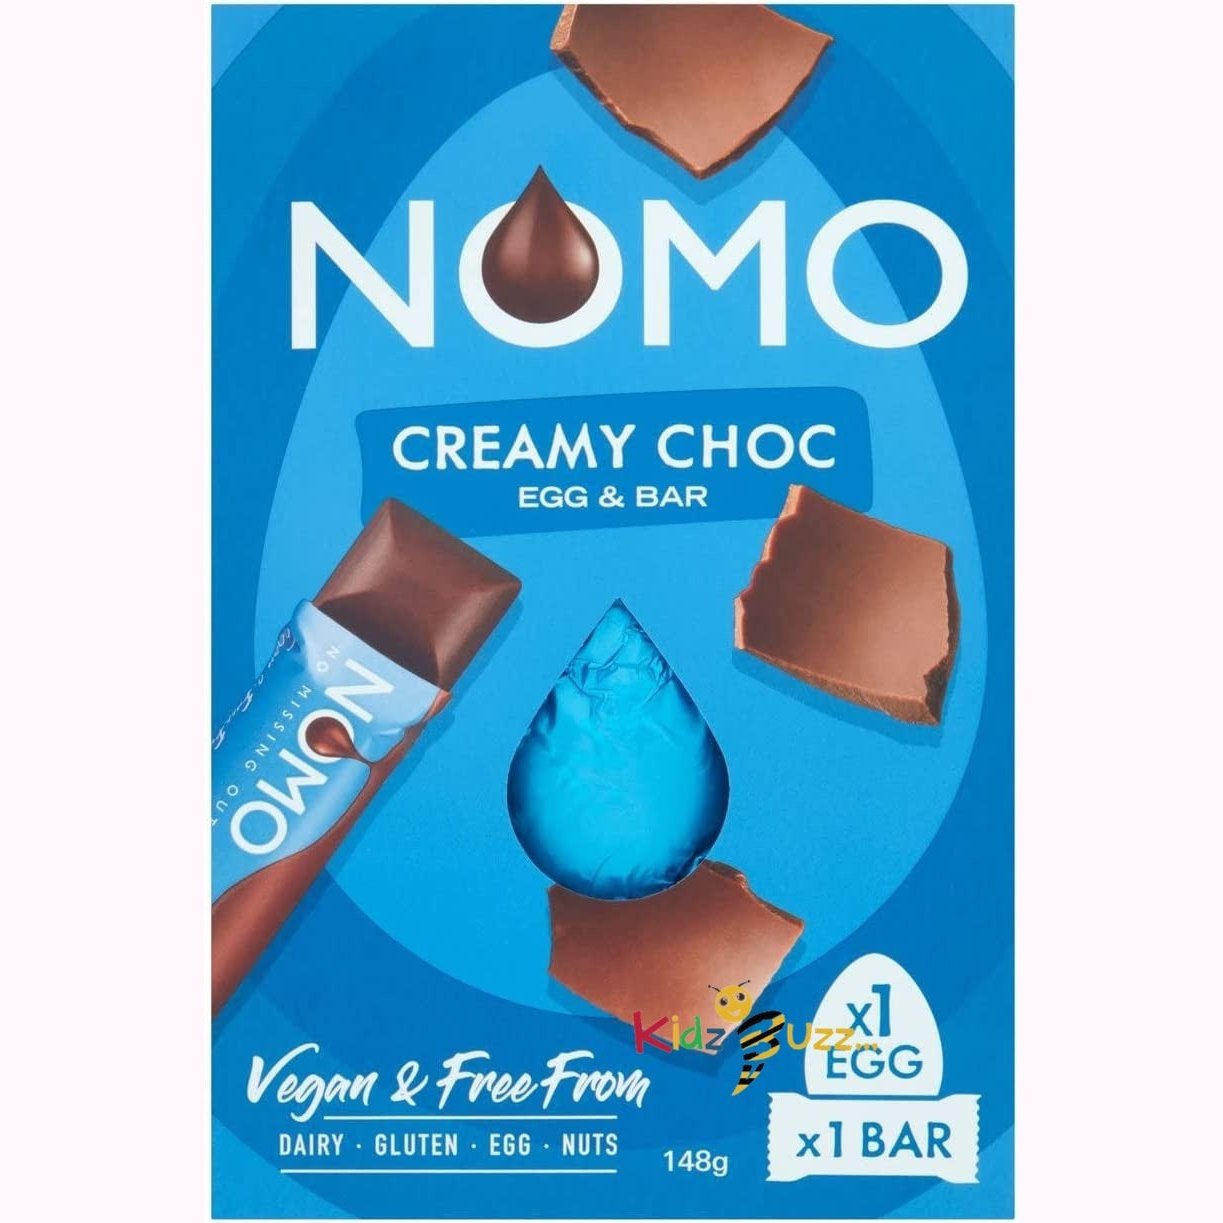 Nomo Vegan Free From Creamy Chocolate Egg 148G Easter Gift Hamper,Delicious Easter Eggs